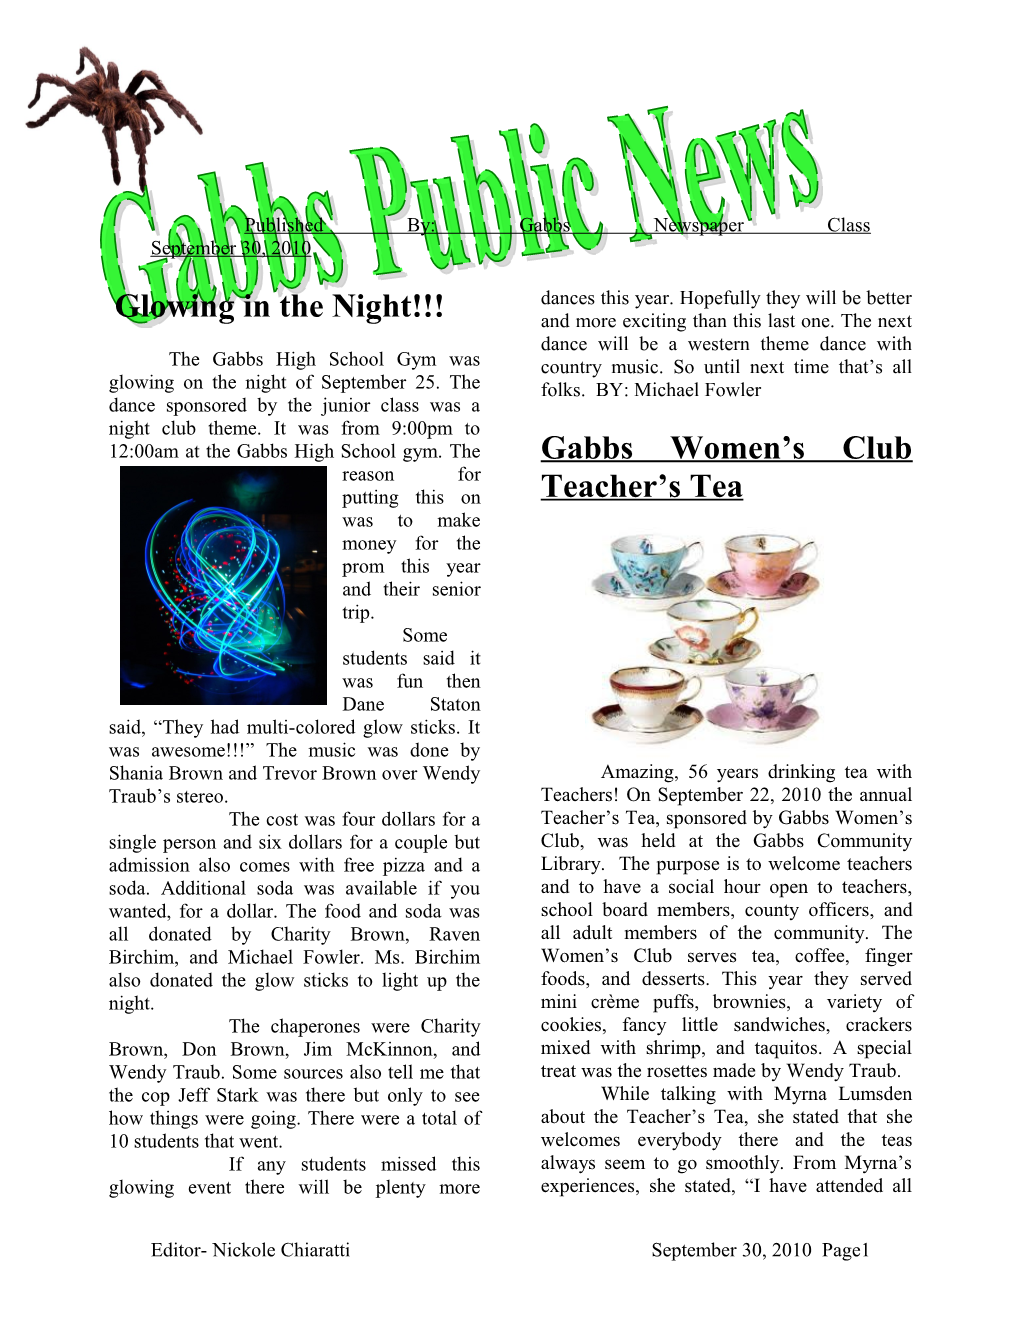 Published By: Gabbs Newspaper Class September 30, 2010